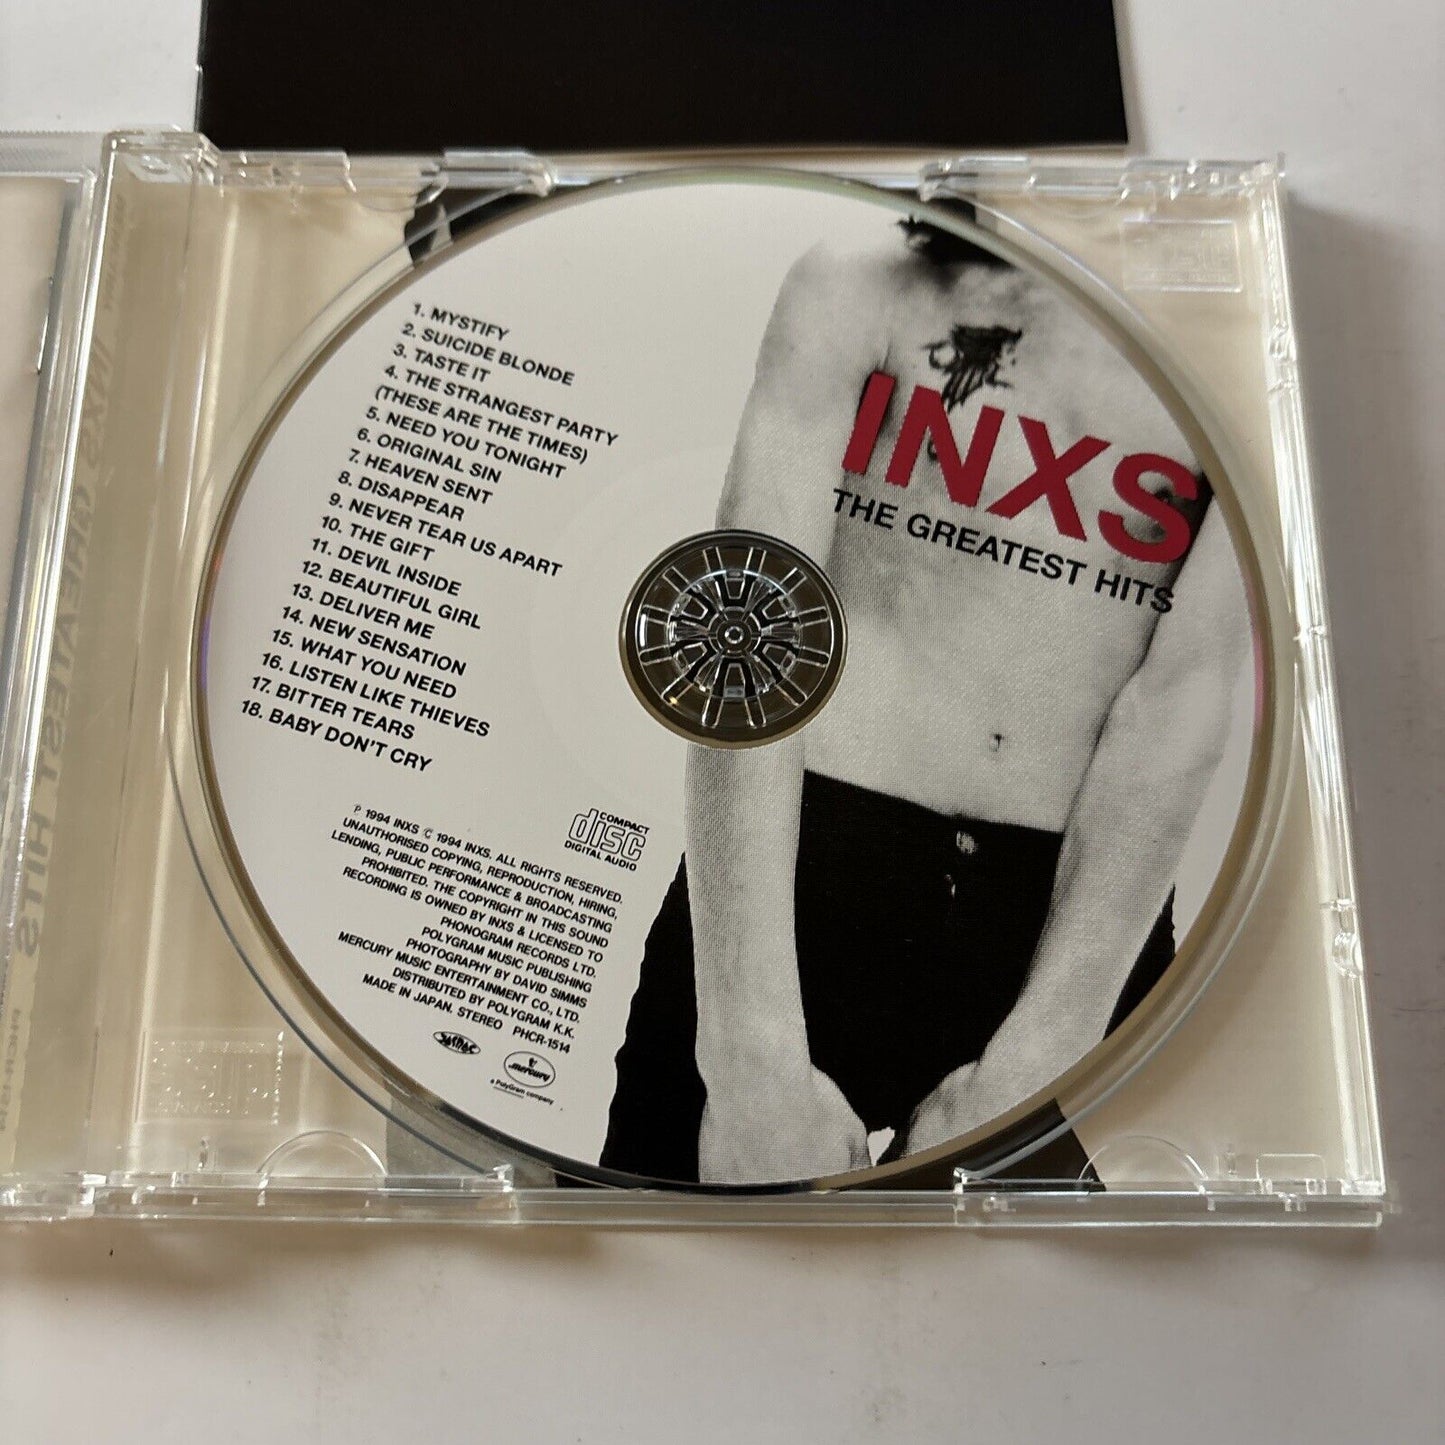 INXS - The Greatest Hits (CD, 1997) Japan Phcr-1514